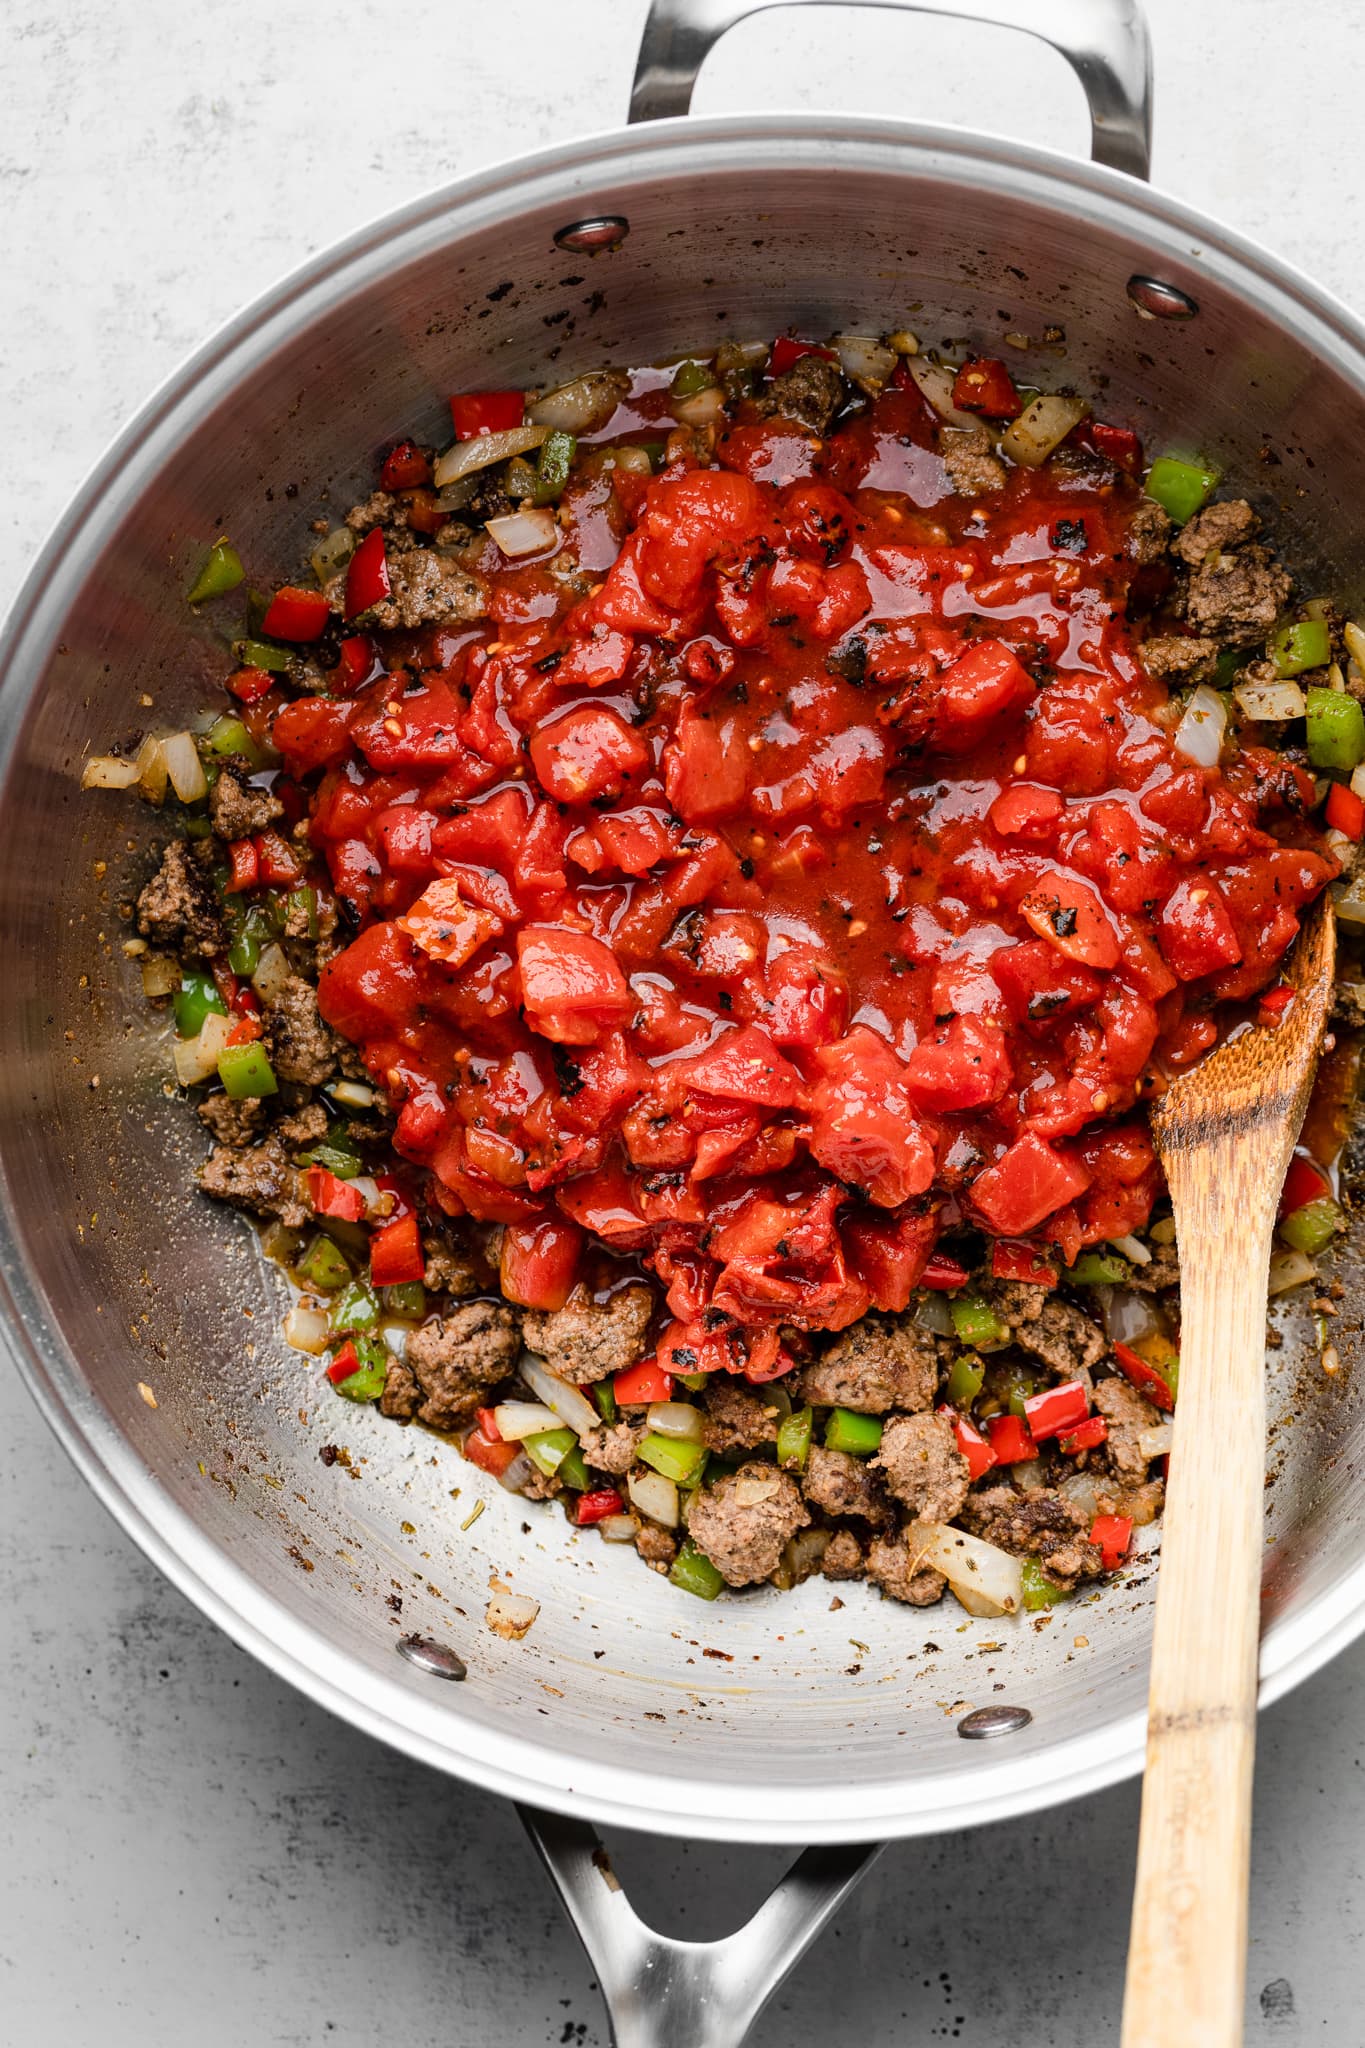 tomatoes in pot with ground beef and veggies